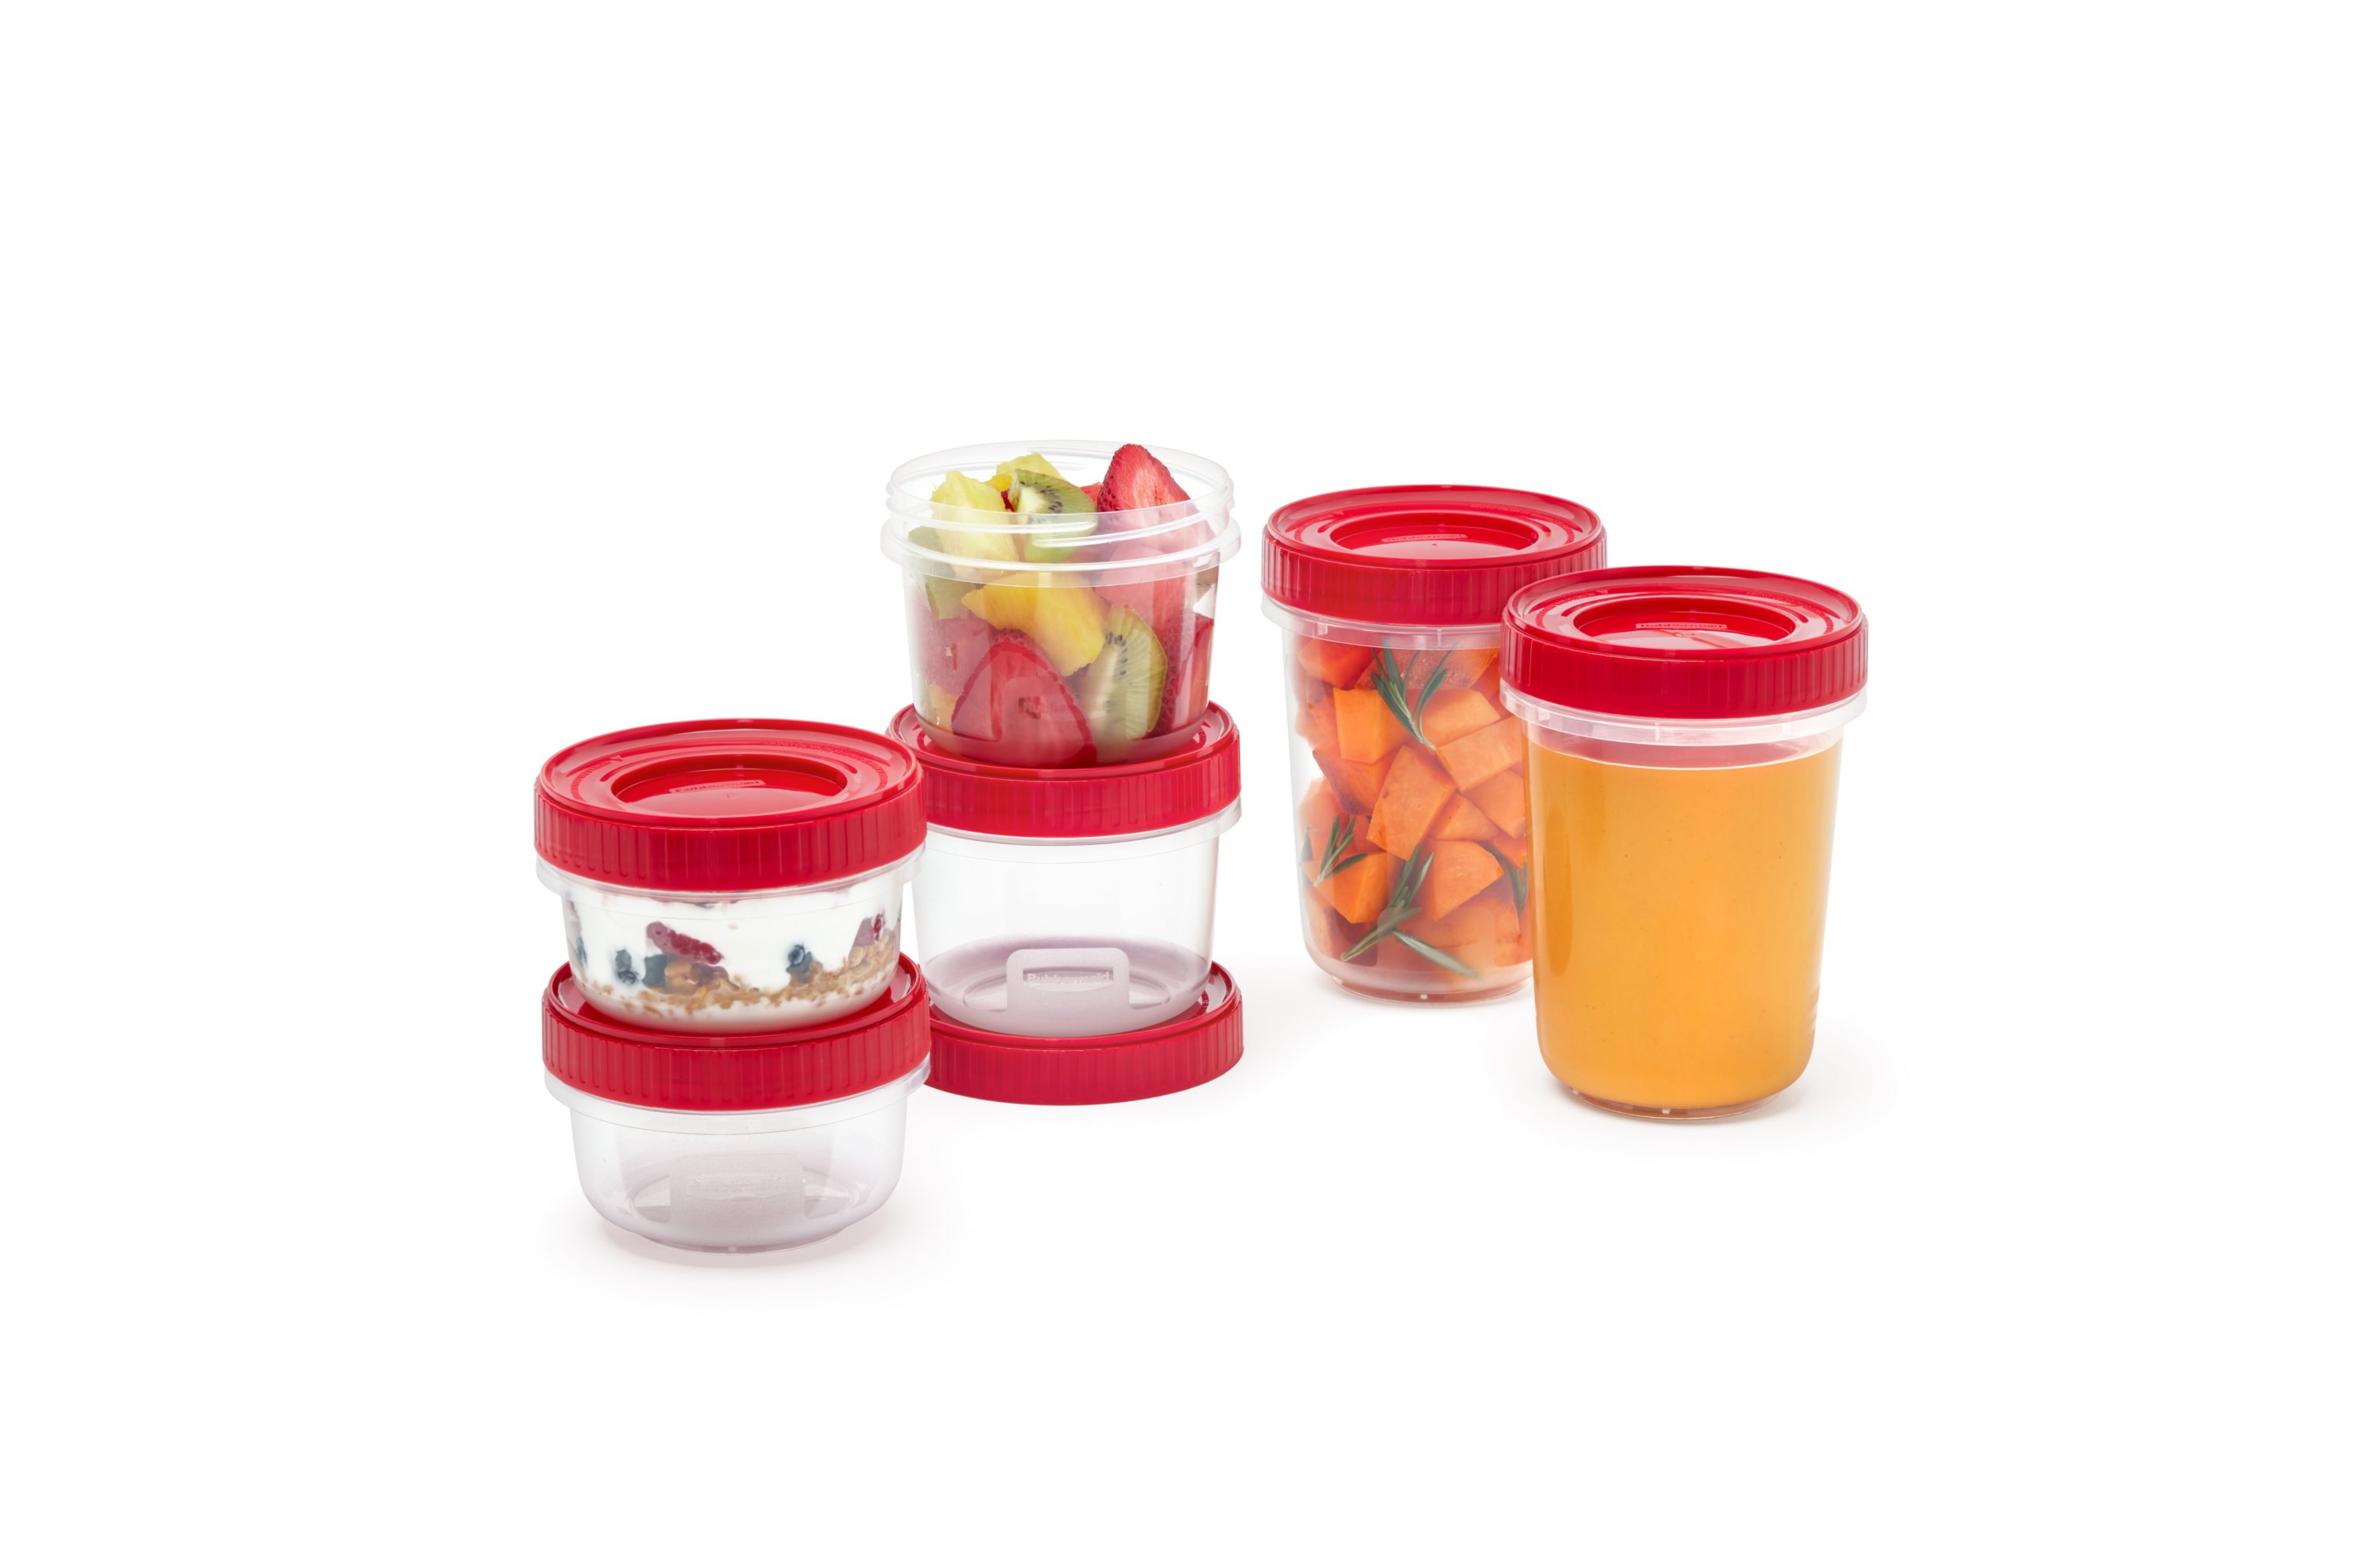 Rubbermaid 7J0000TCHIL Twist and Seal Containers, 2 Cup Capacity